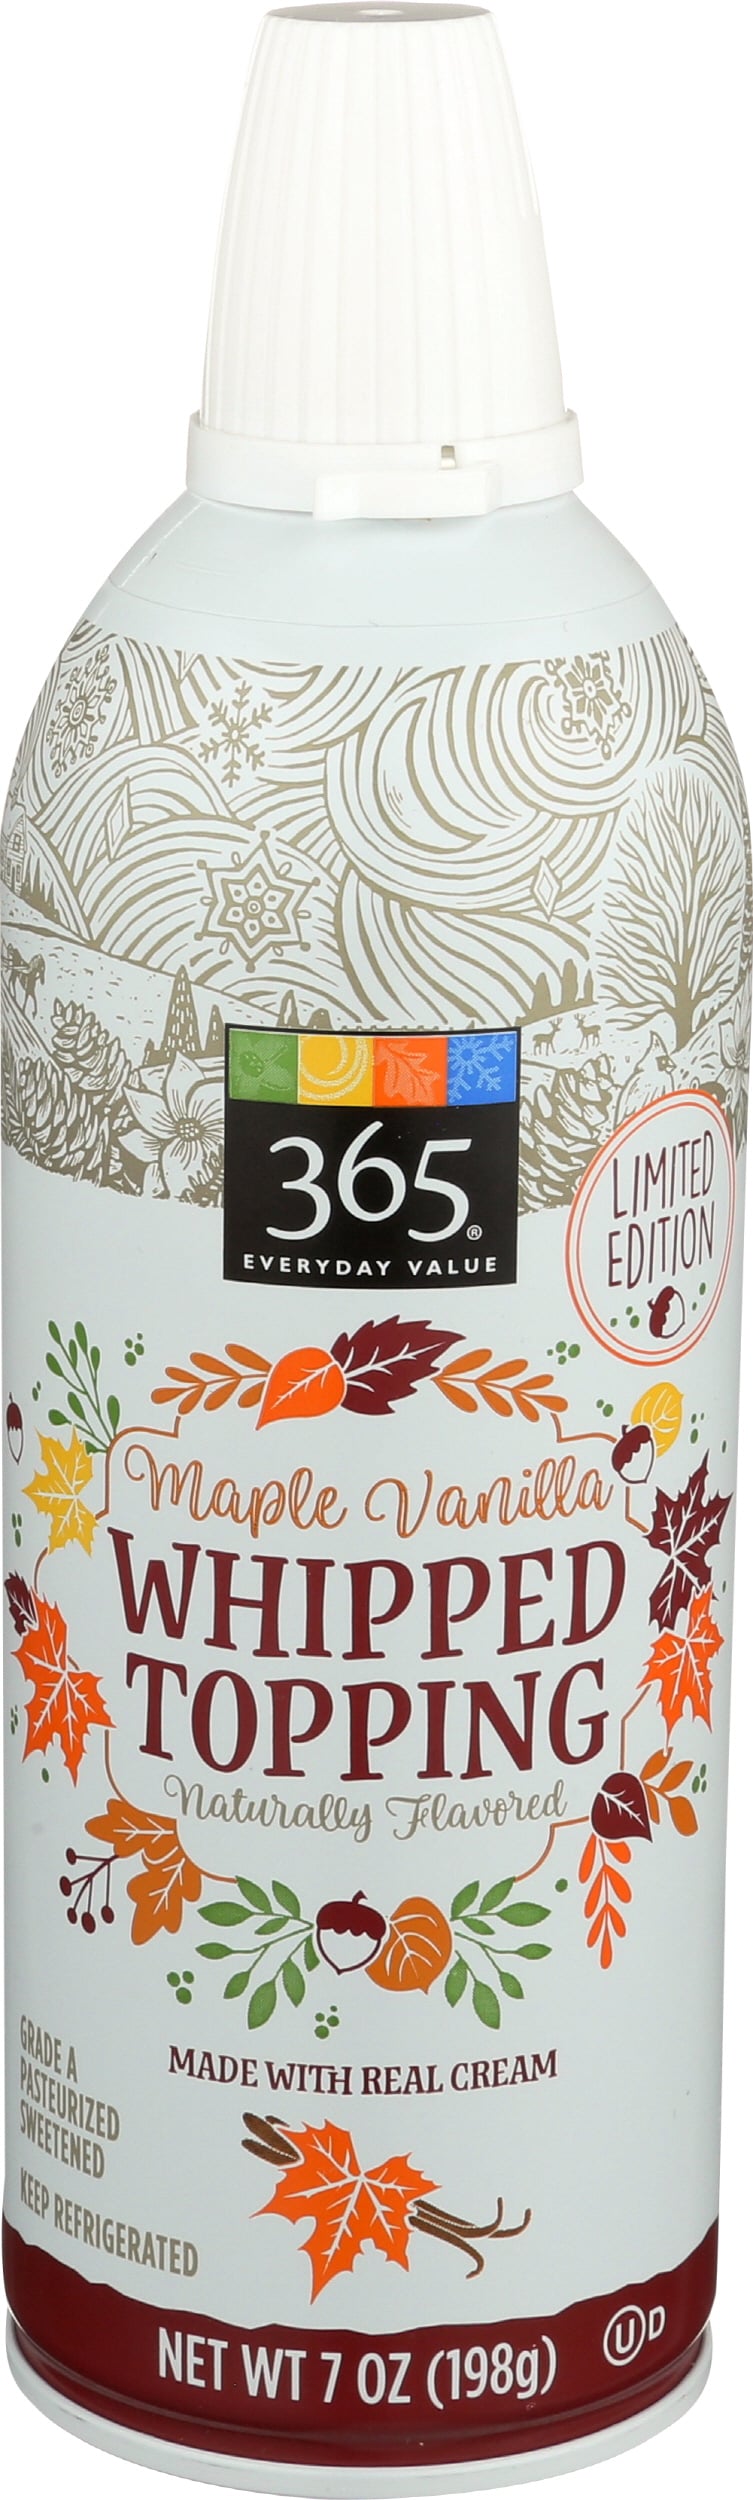 365 Everyday Value Maple Vanilla Whipped Topping